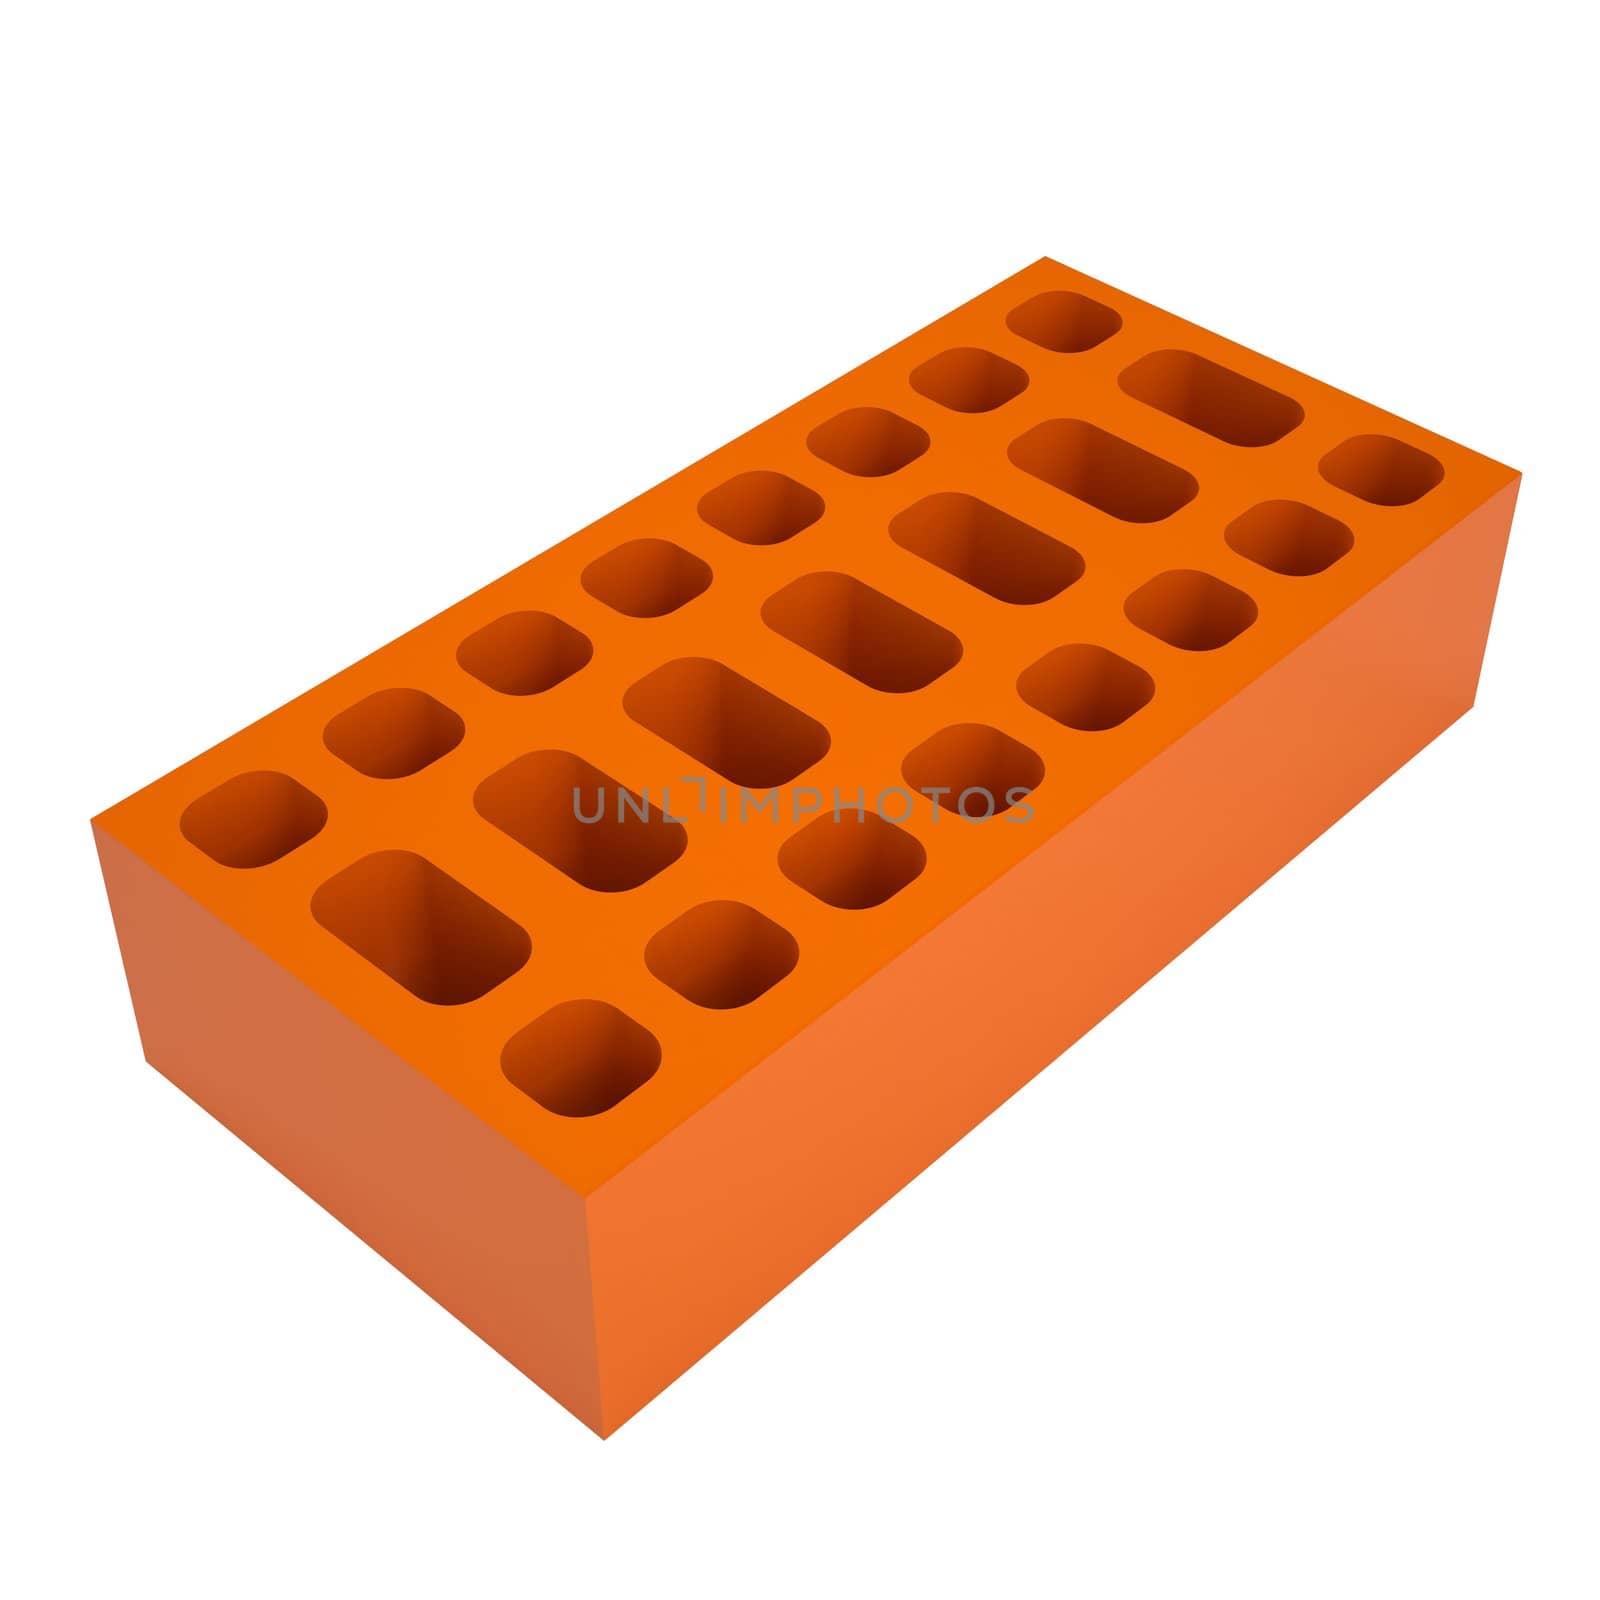 Red brick. Isolated render on a white background